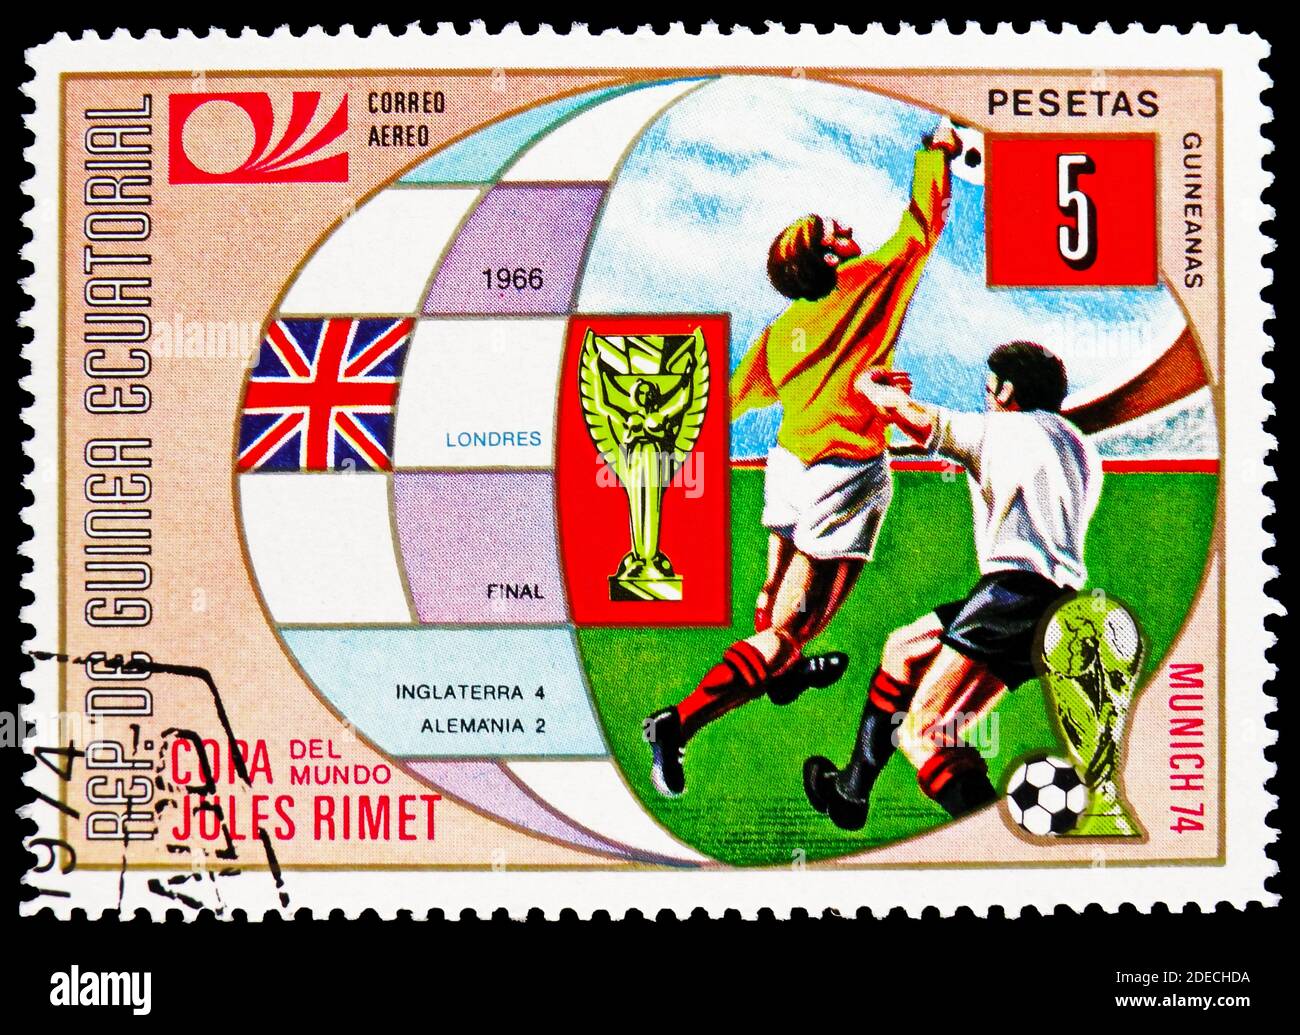 MOSCOW, RUSSIA - OCTOBER 17, 2020: Postage stamp printed in Equatorial Guinea shows London, Football World Cup 1974, Germany: Earlier World Cup finals Stock Photo